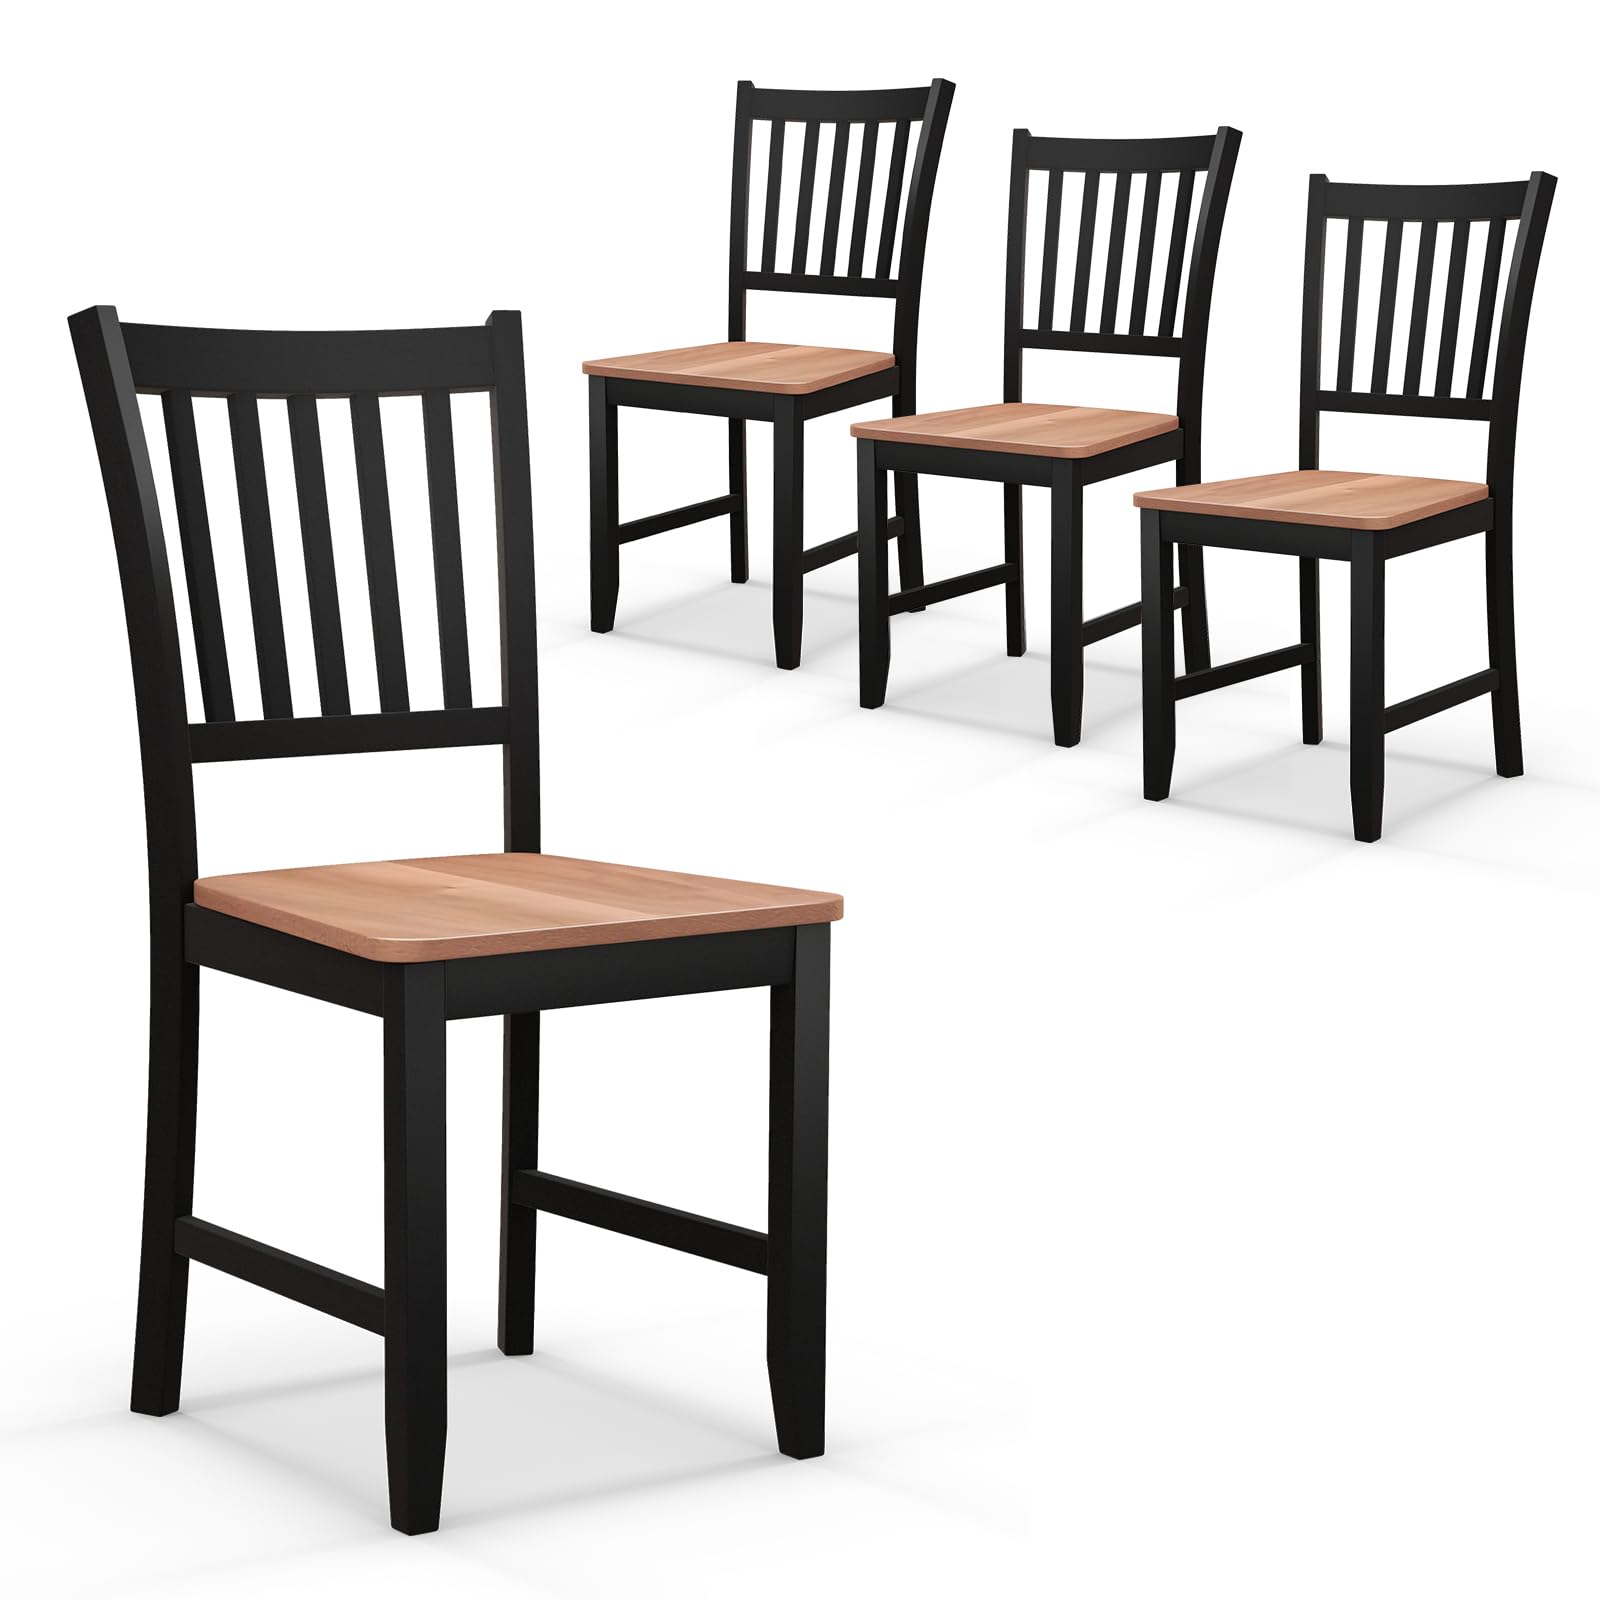 Giantex Wooden Dining Chairs Set of 4, Farmhouse Kitchen Chair with Rubber Wood Legs